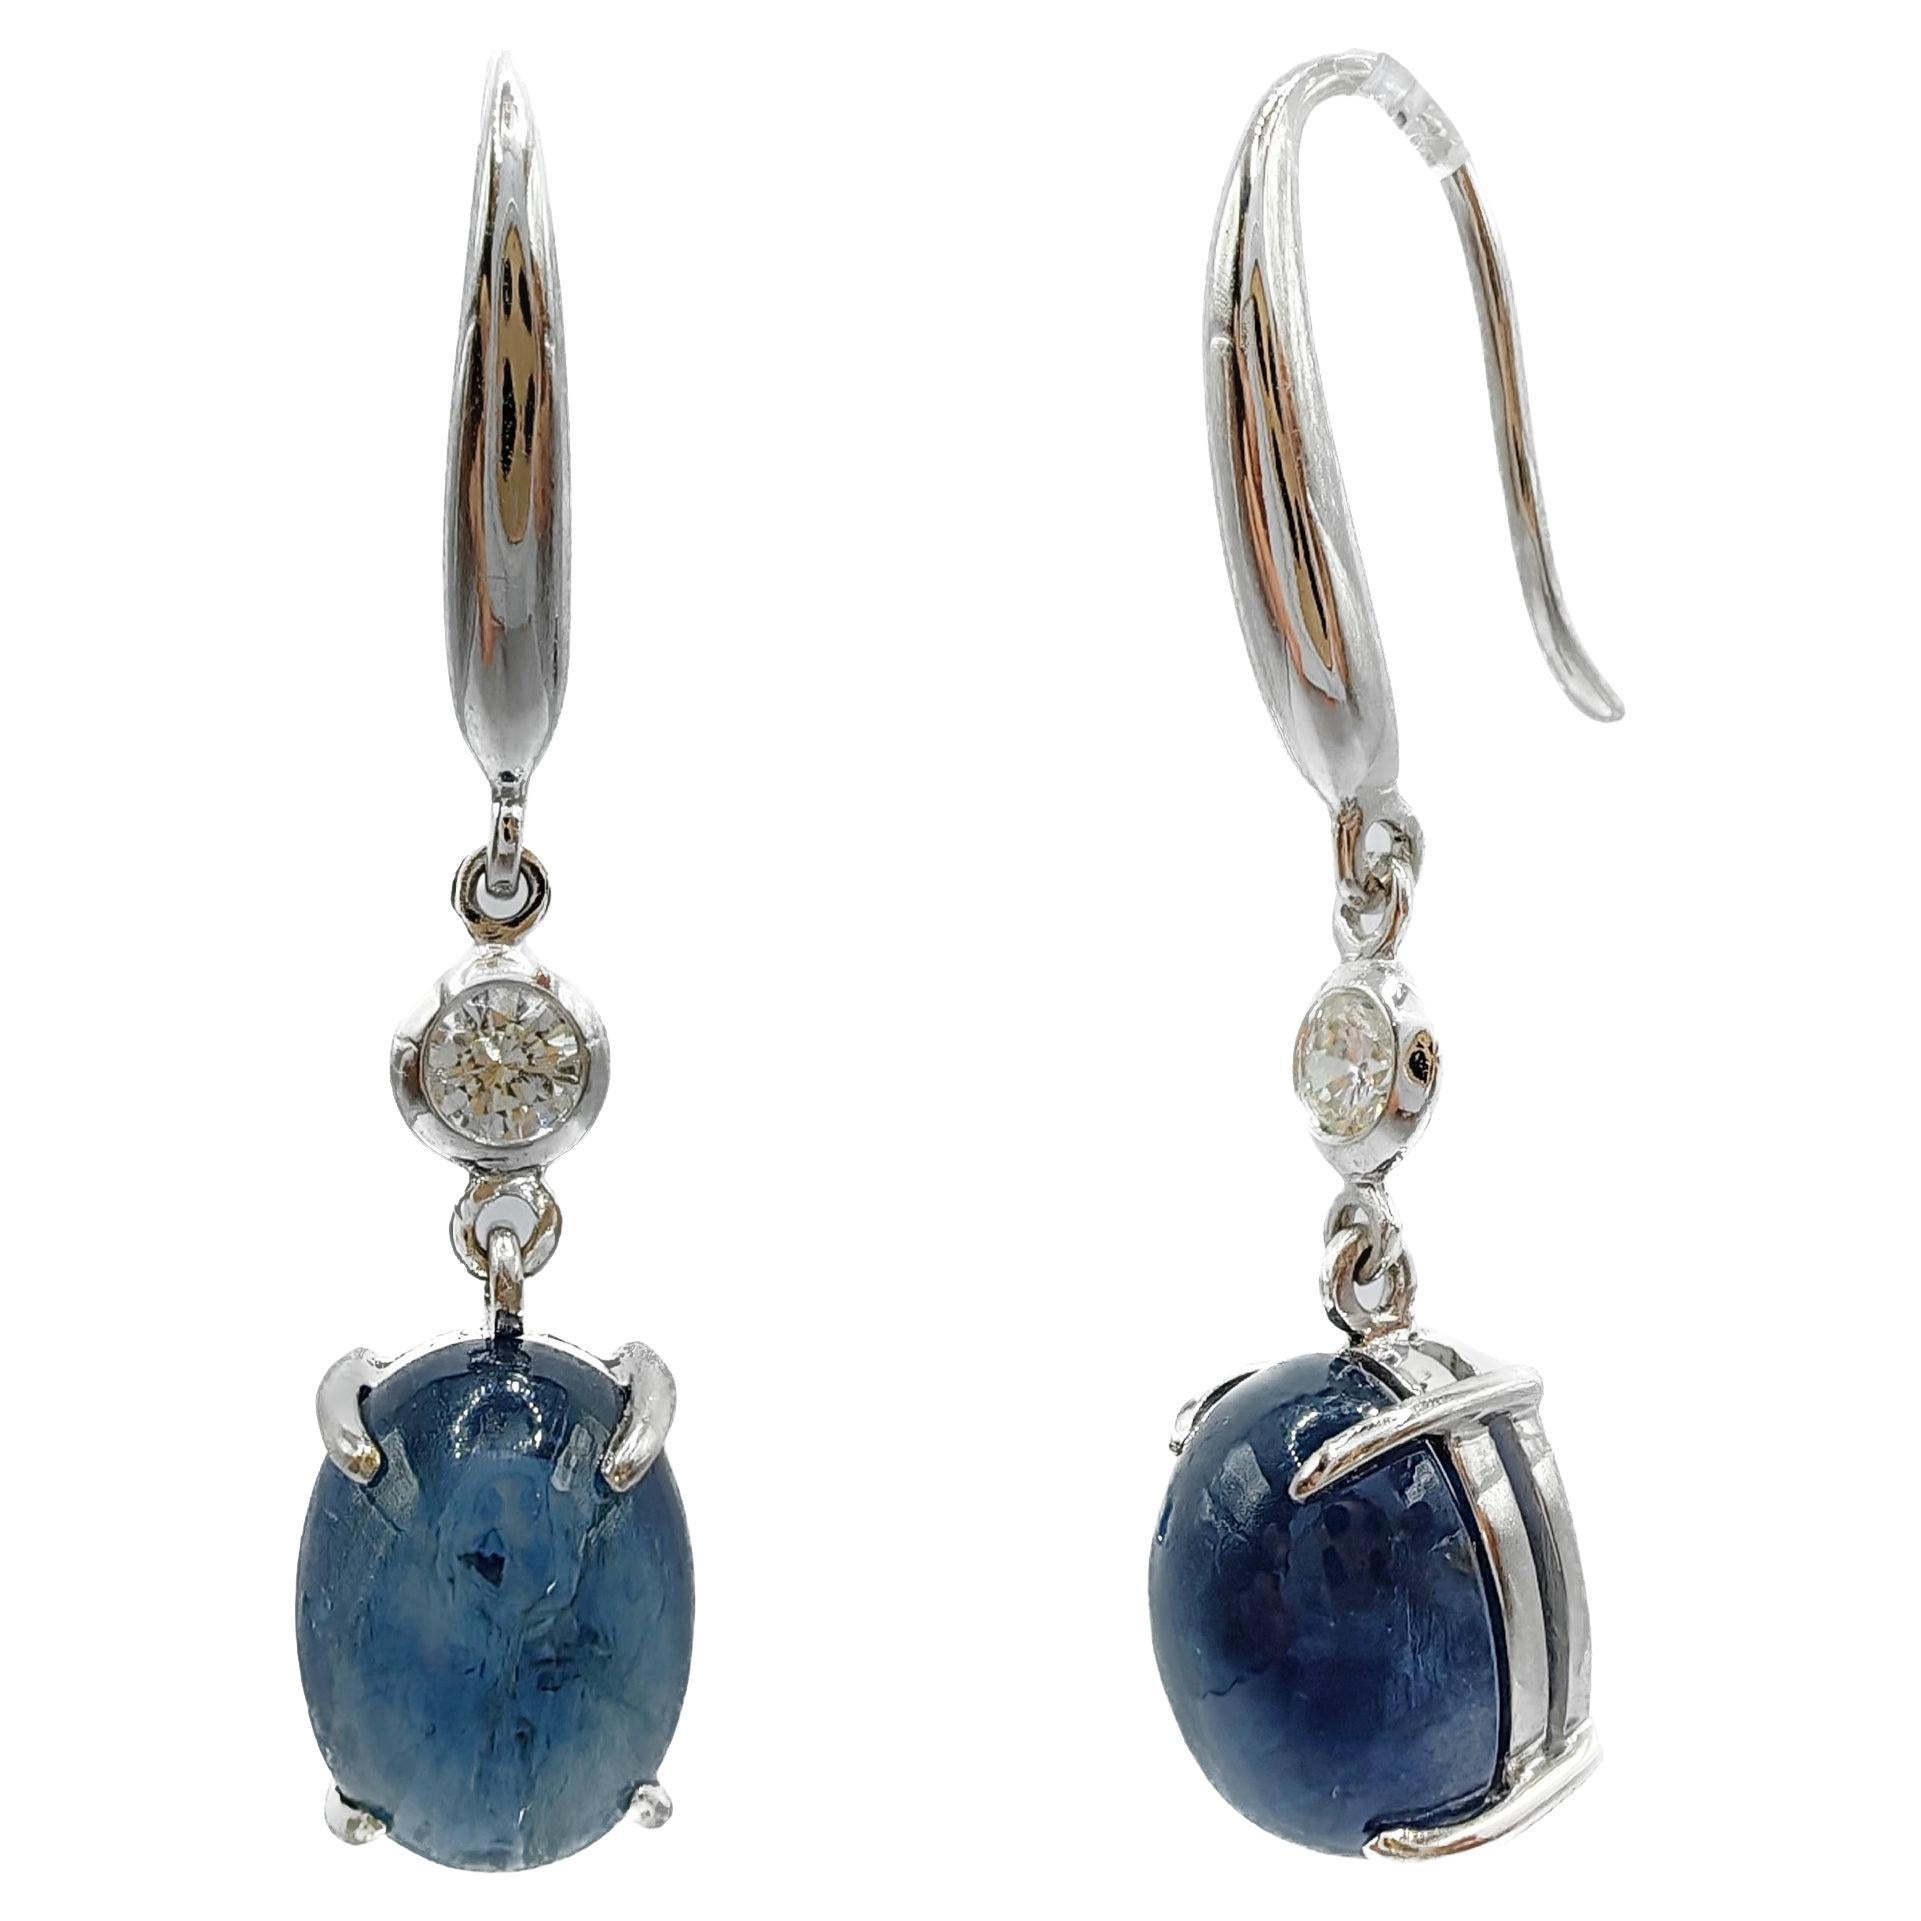 6.94ct Cabochon Blue Sapphire Diamond Dangling Earrings in 18K White Gold For Sale